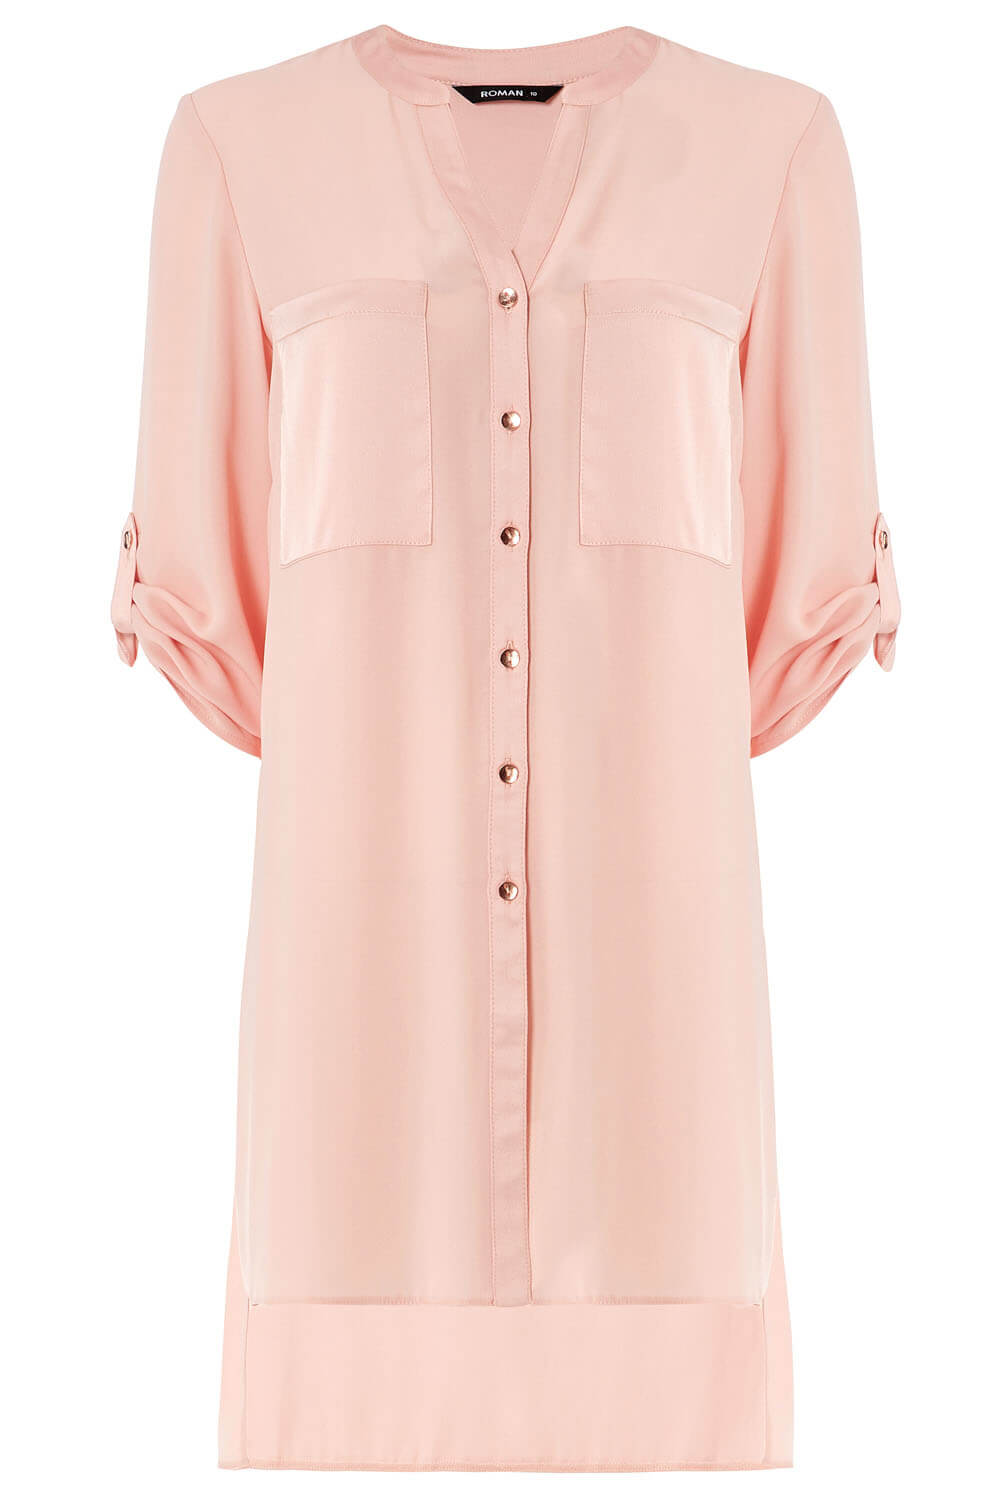 PINK Longline Button Through Blouse, Image 5 of 5